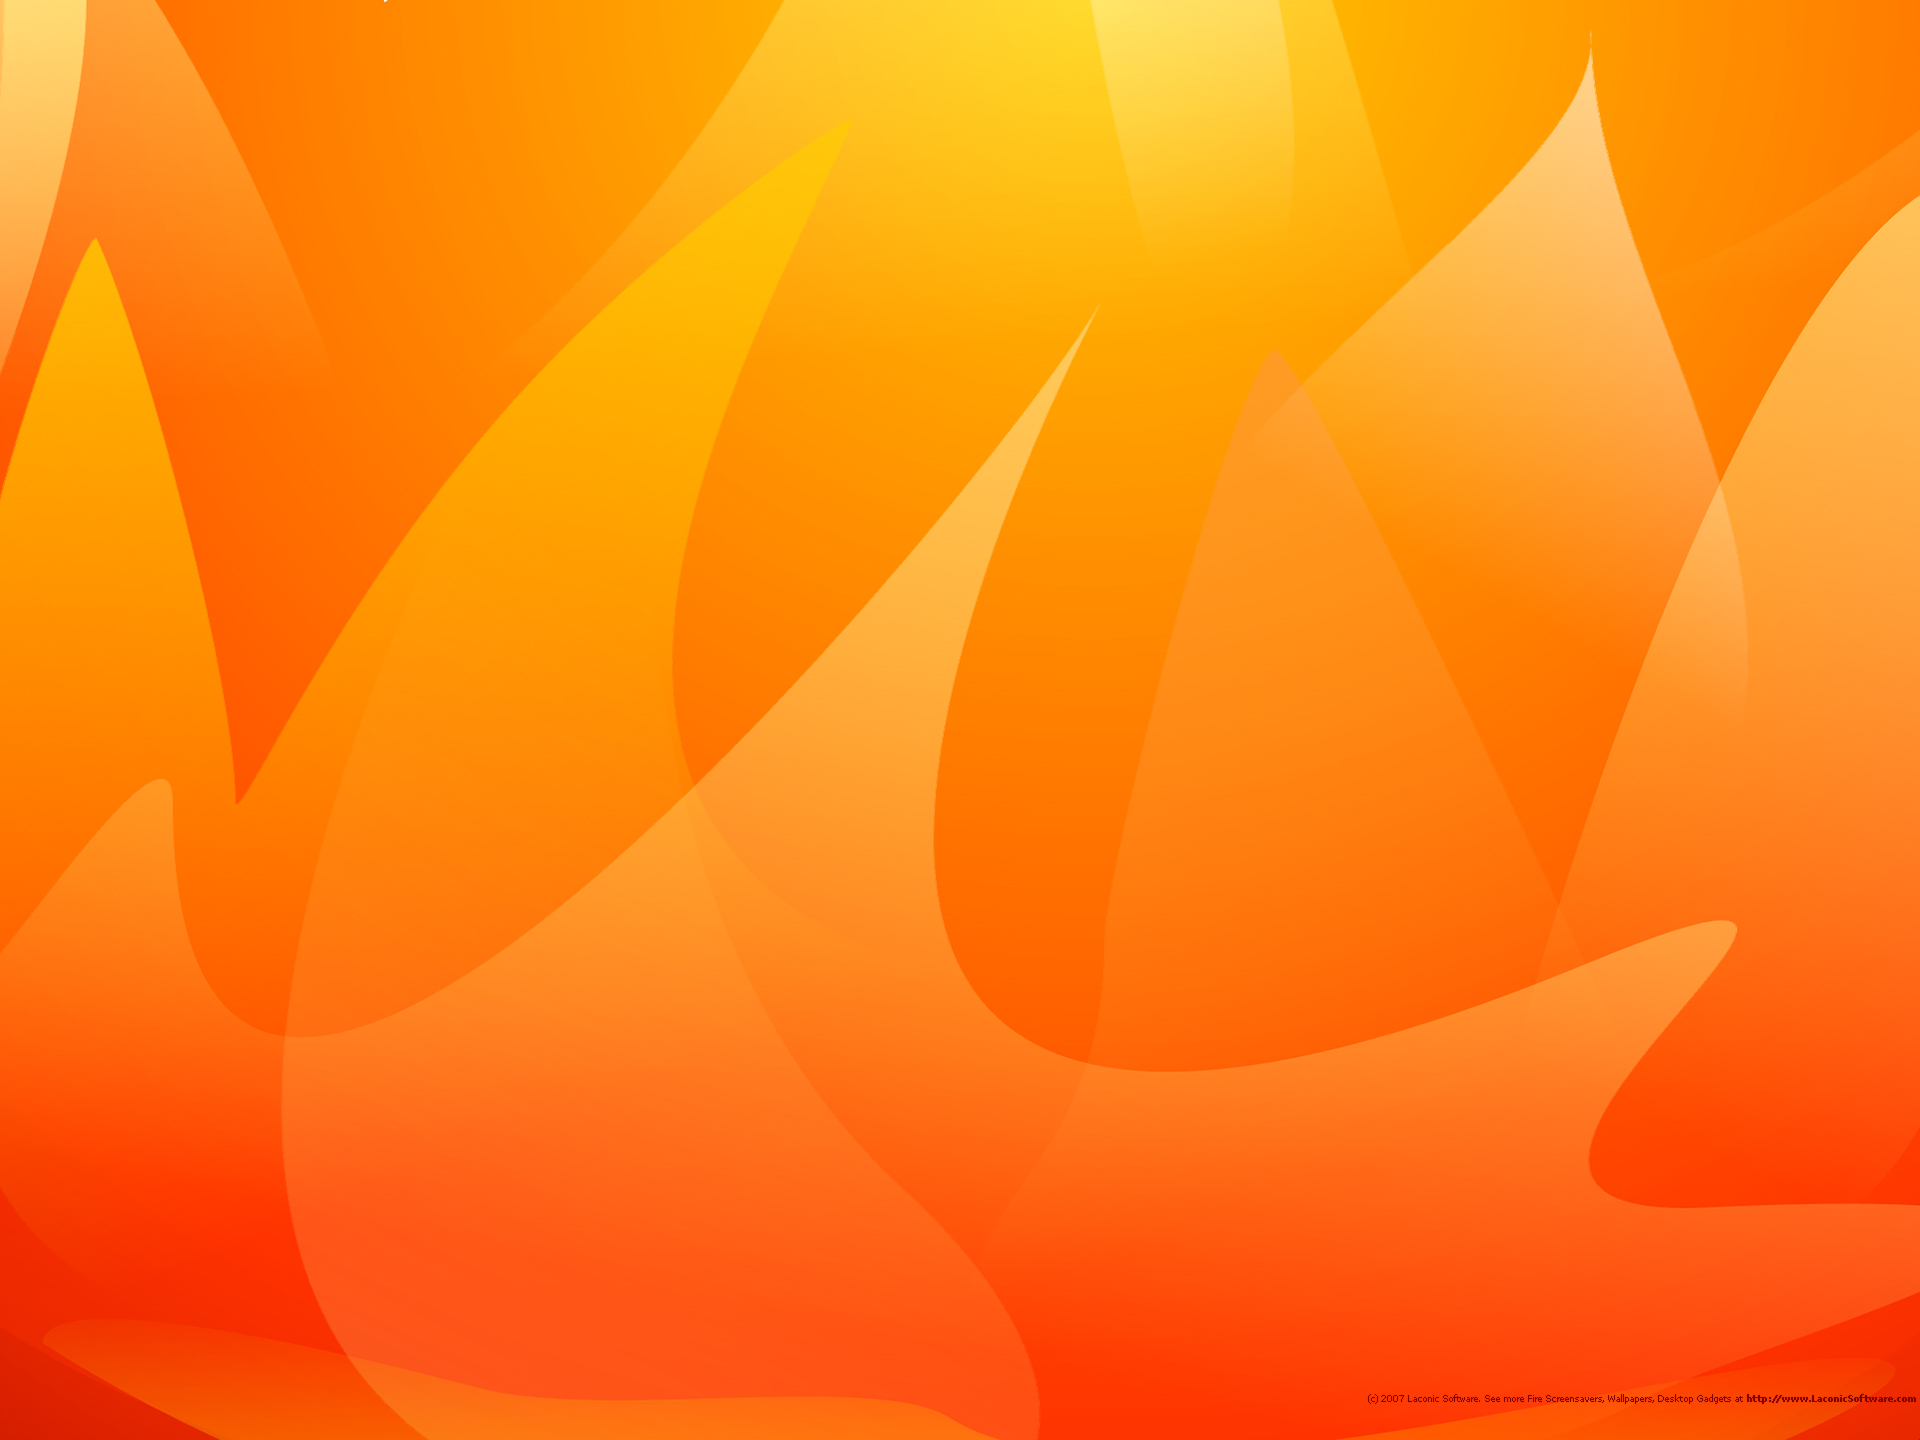 Flame Wallpapers Top 42 Quality Cool Flame Backgrounds